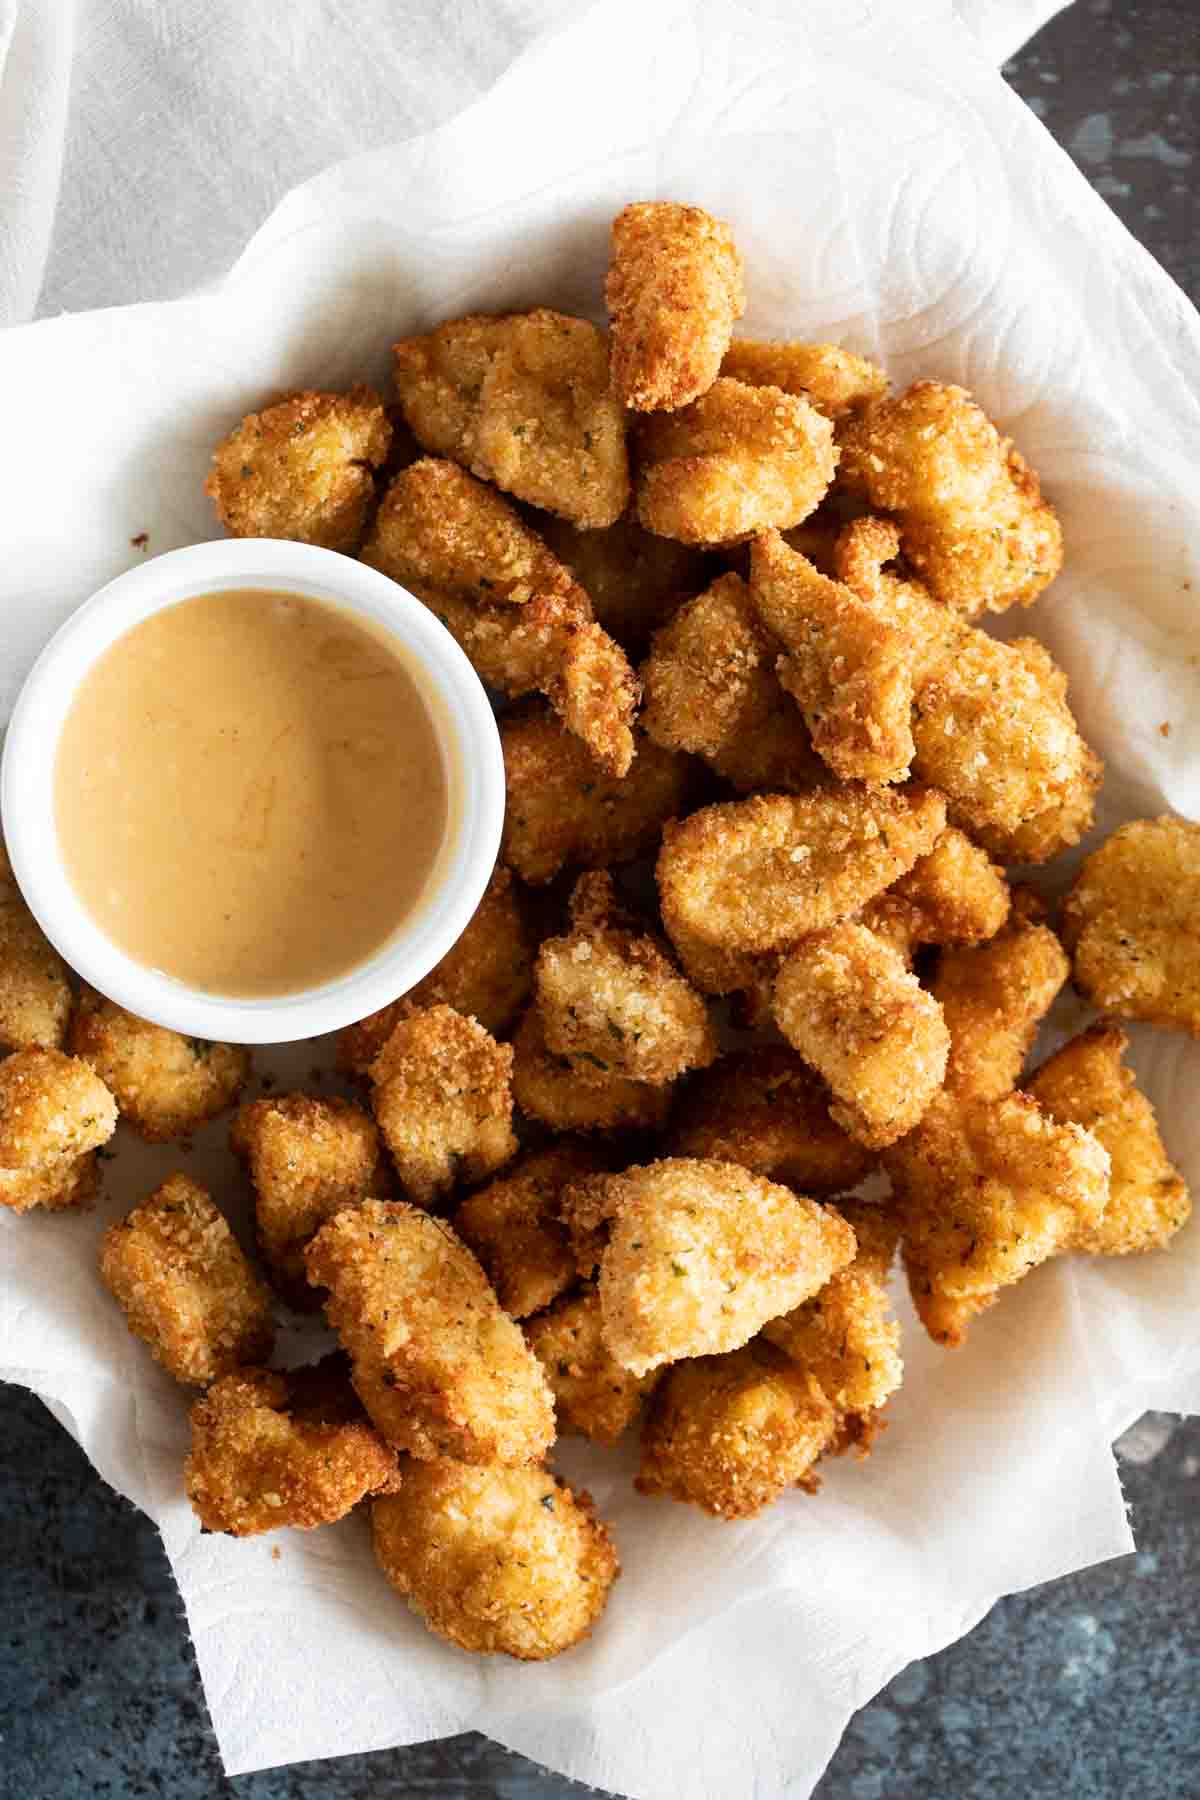 Homemade Chicken Nuggets with Chick fil a Sauce